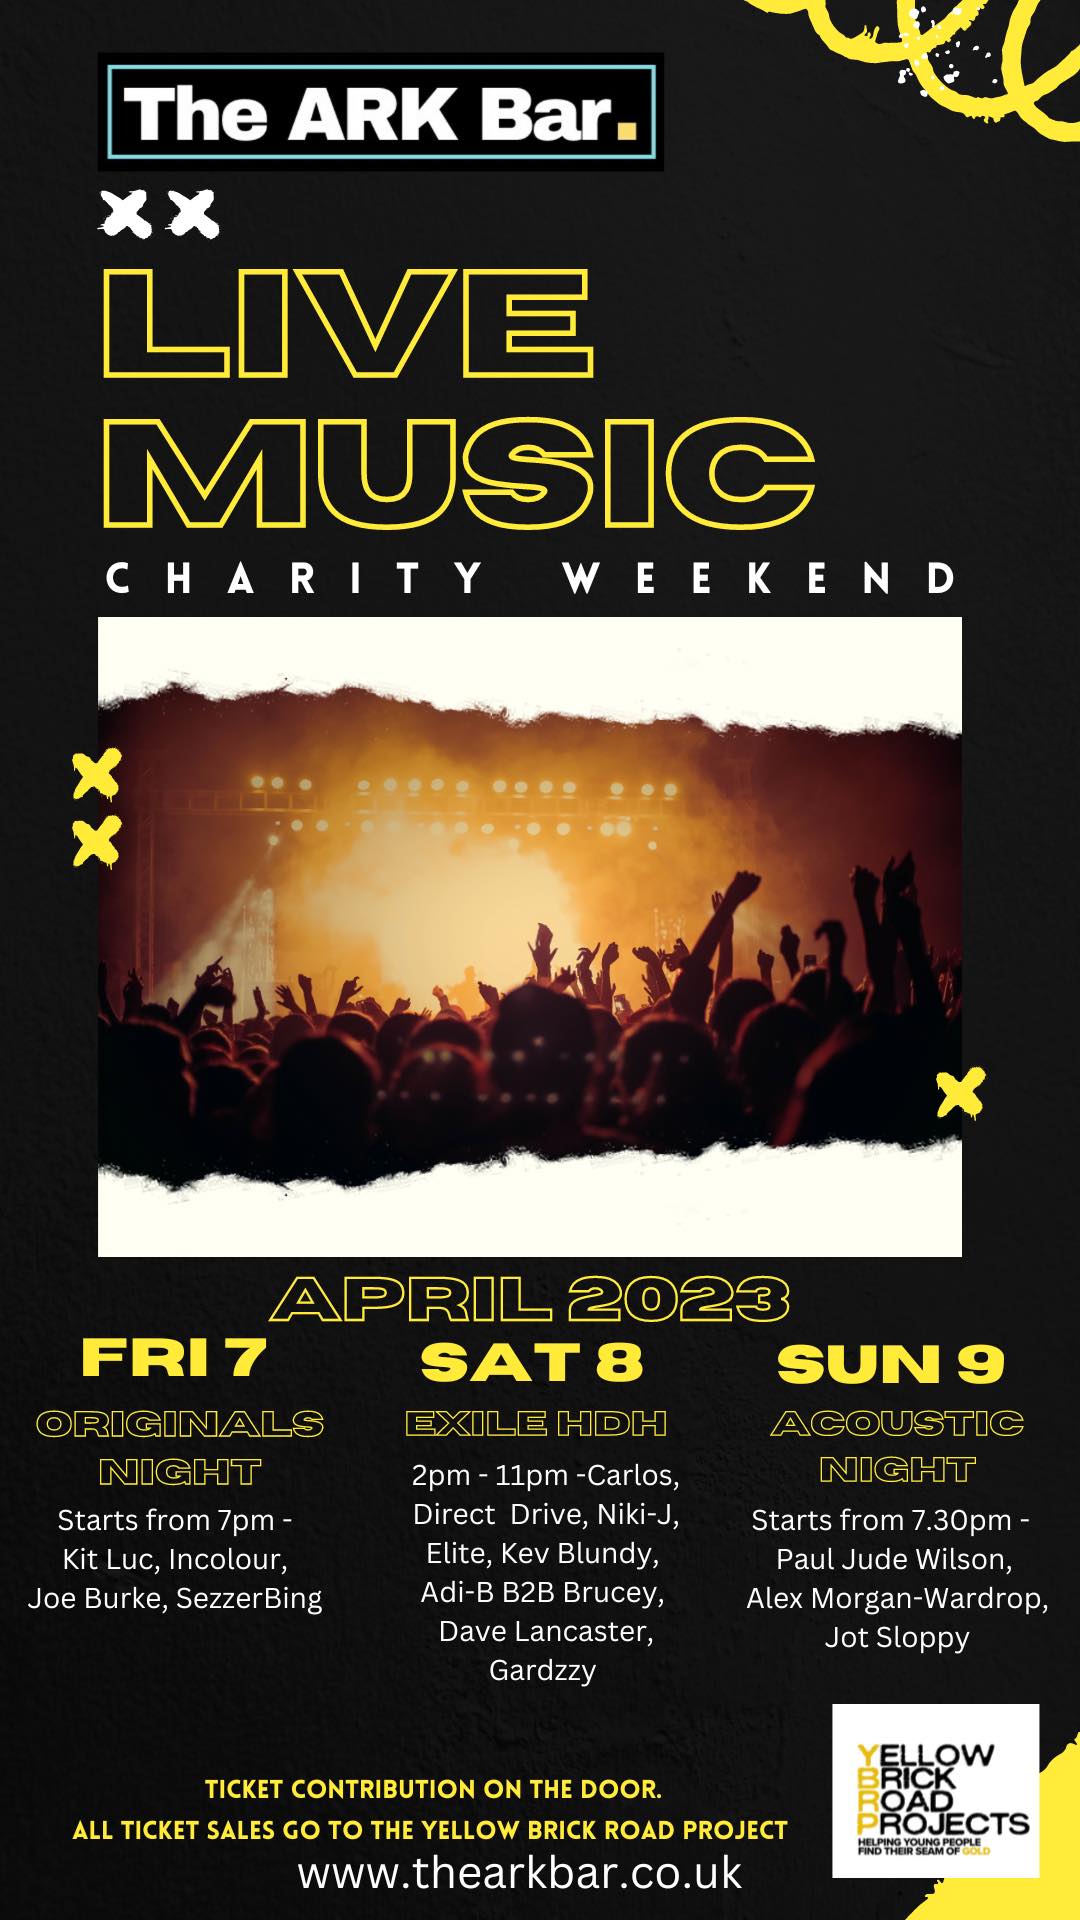 The ARK Bar Live Music Charity Weekend - FRIDAY: ORIGINALS NIGHT